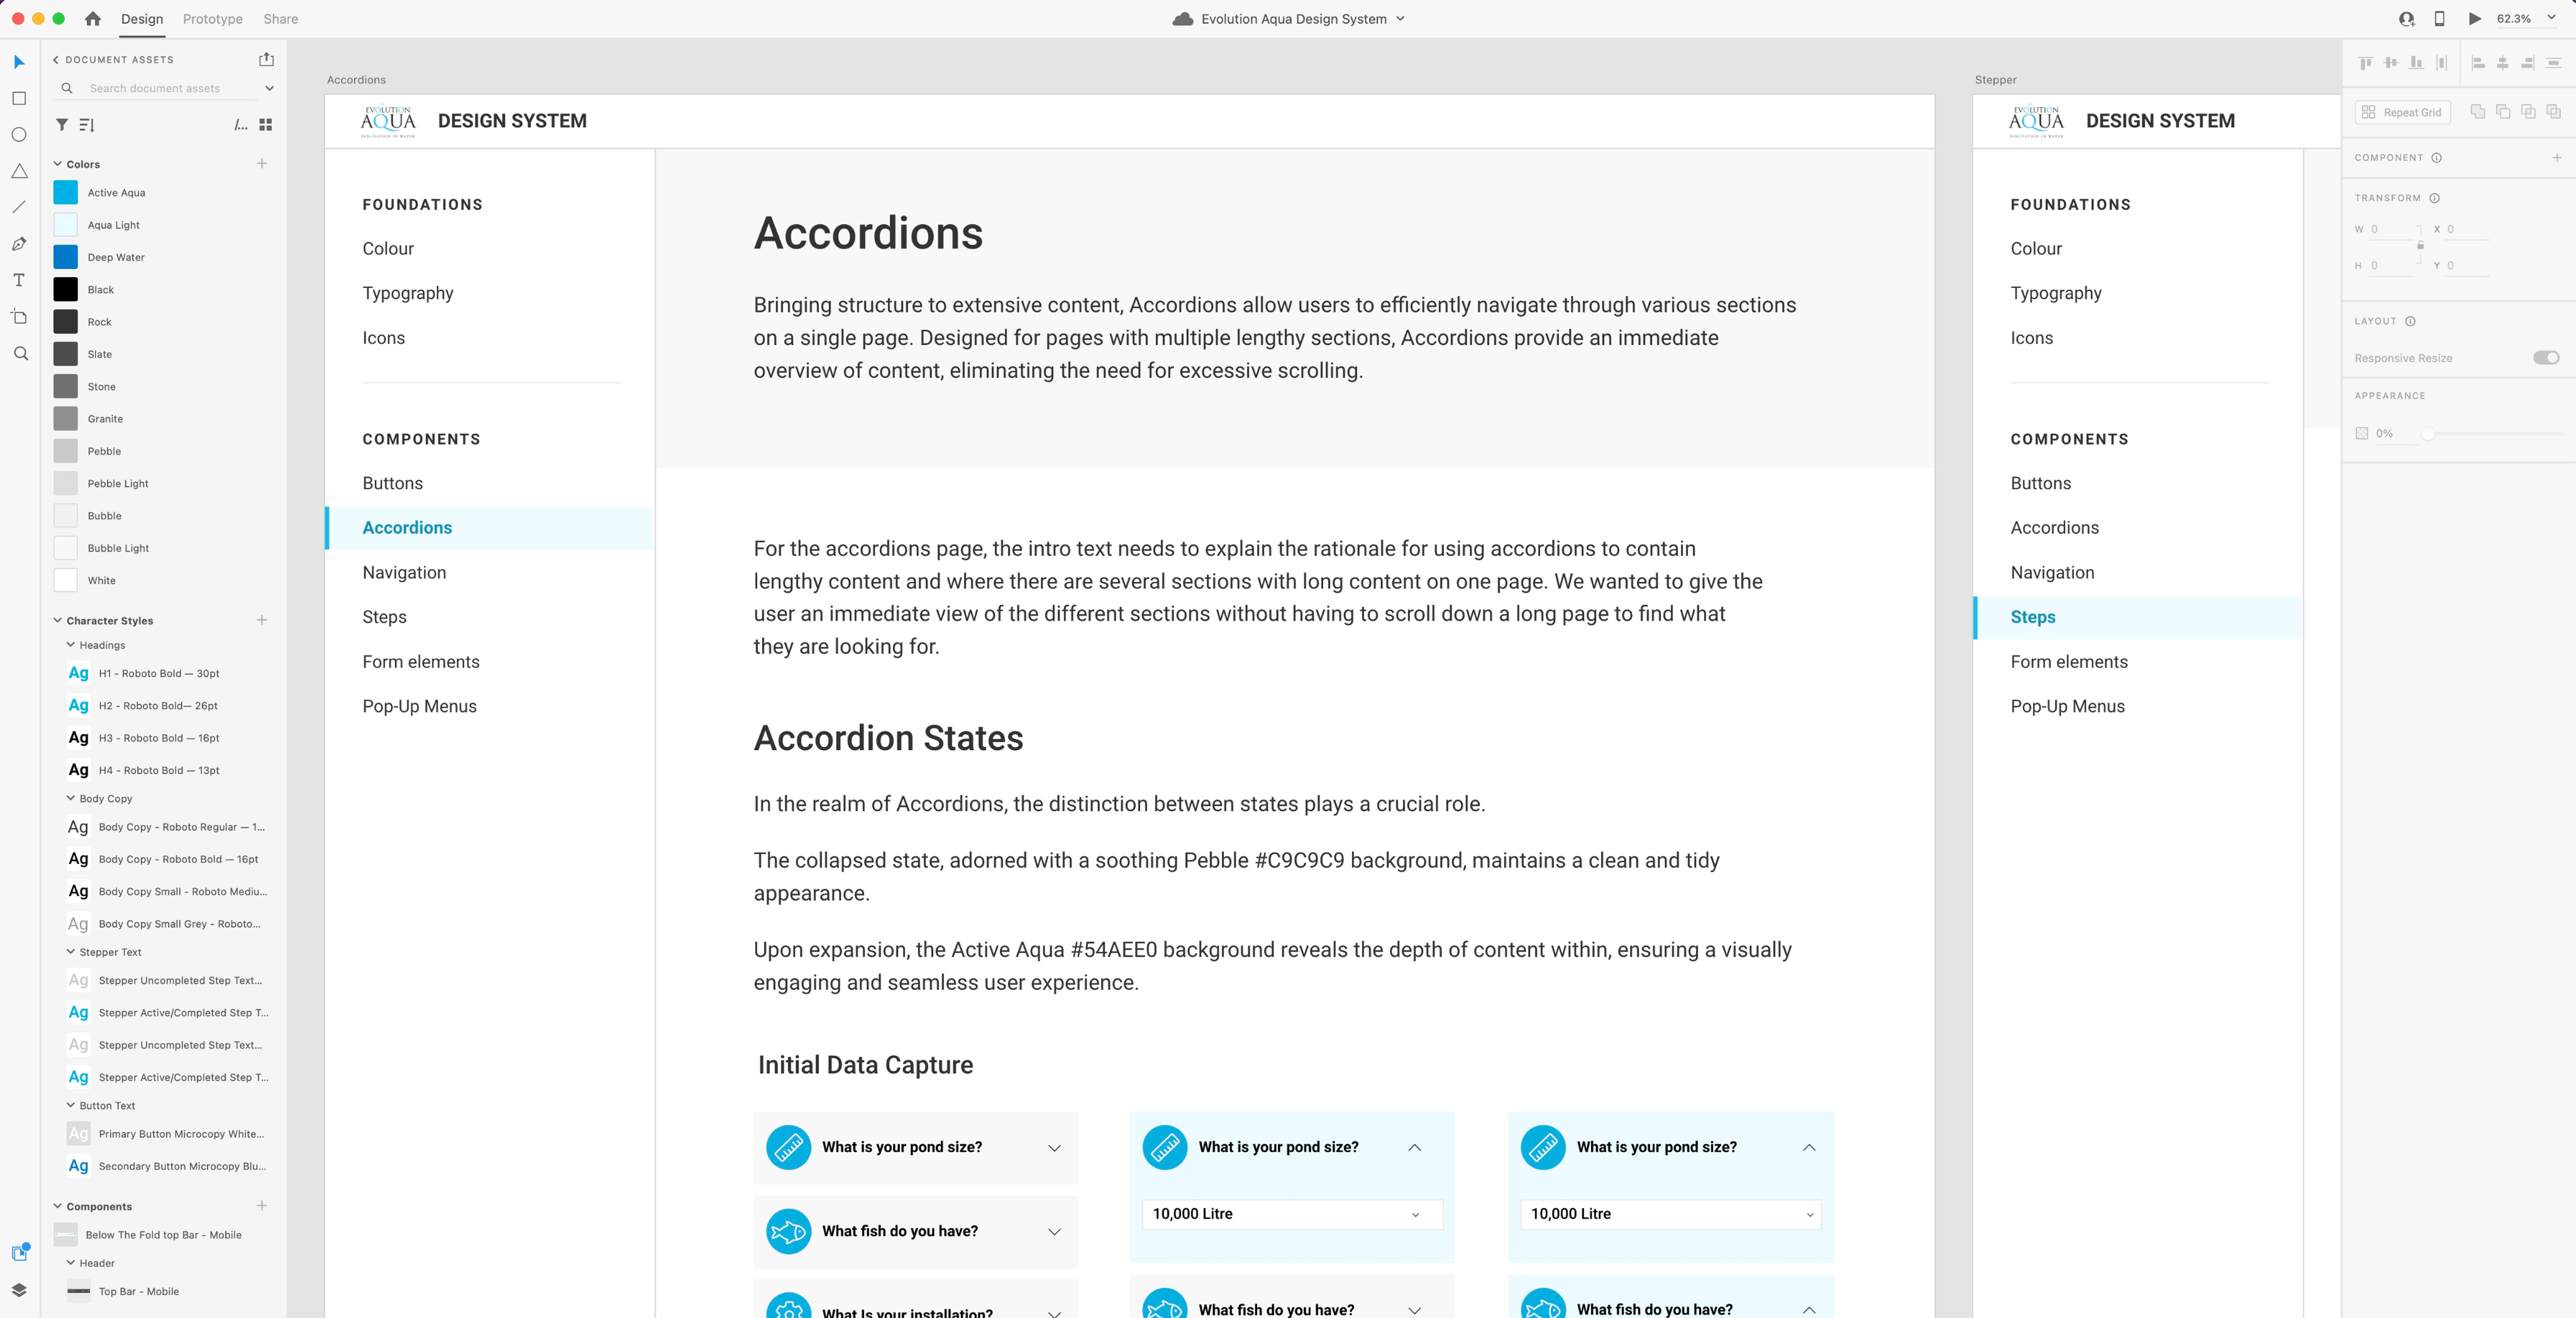 Image showing a page of accordions section of the design system.